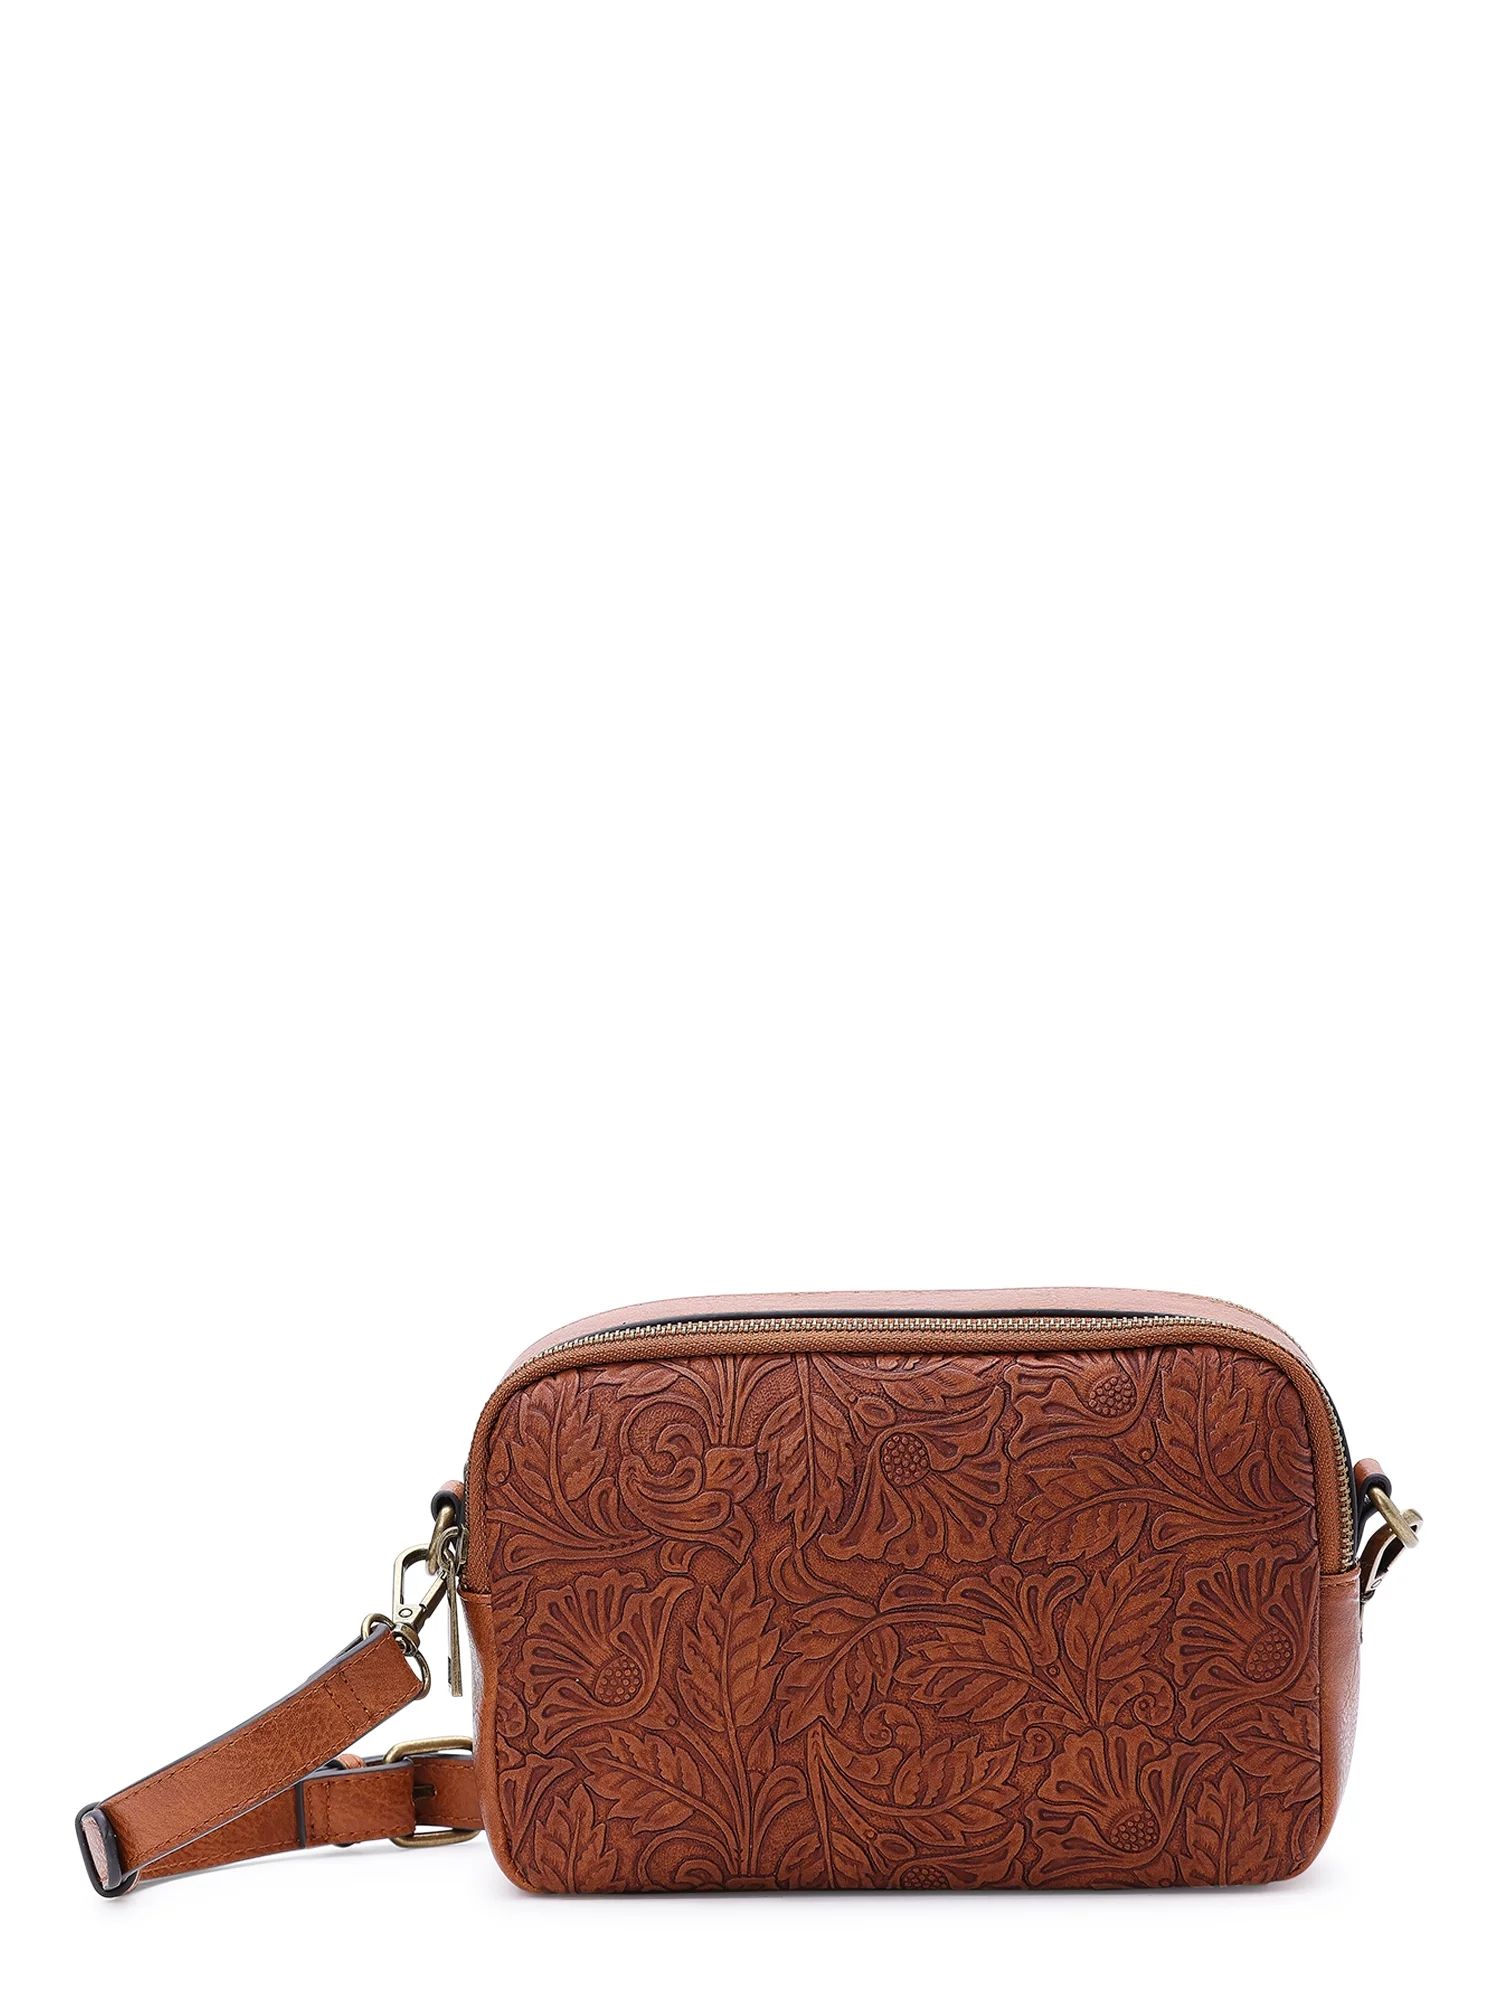 The Pioneer Woman Tooled Faux Leather Camera Bag Crossbody | Walmart (US)